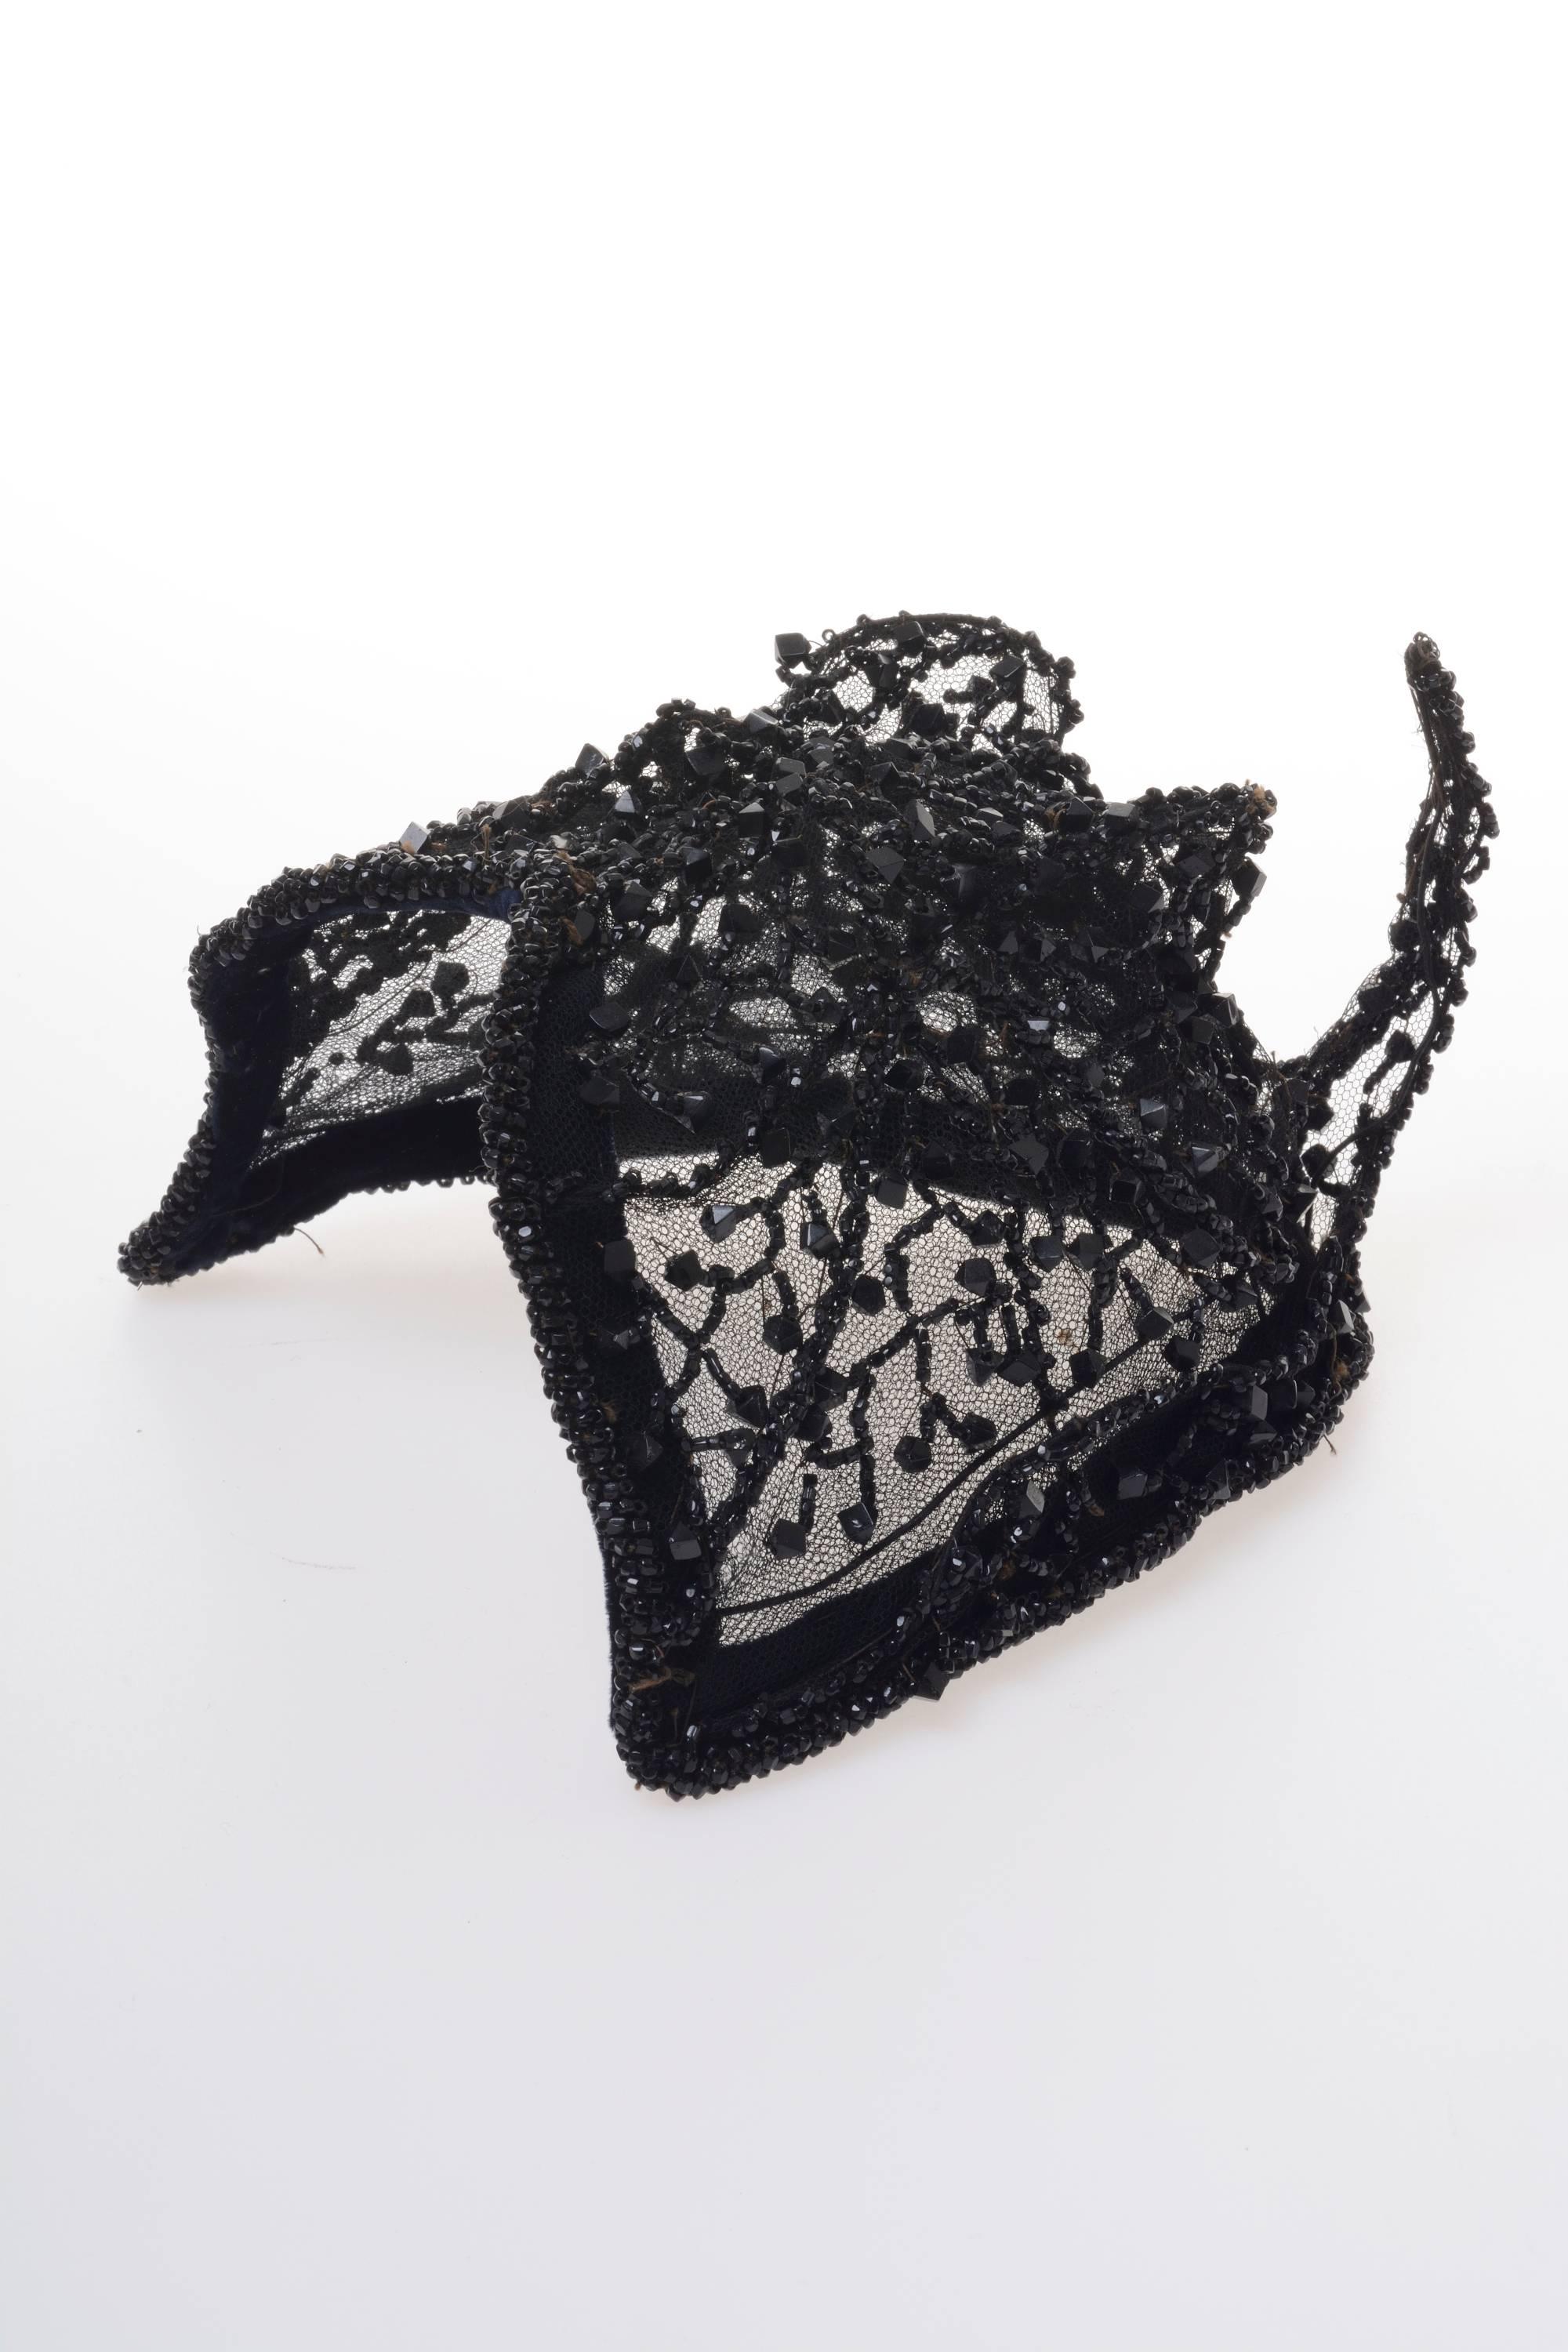 This lovely 1950s rare amazing fascinator hat by Italian couture has a cat shape inspiration, with a tail and ears, totally embroidered on tulle. 

Excellent vintage condition

Label: n/a
Color: Black
Material: Embroidered